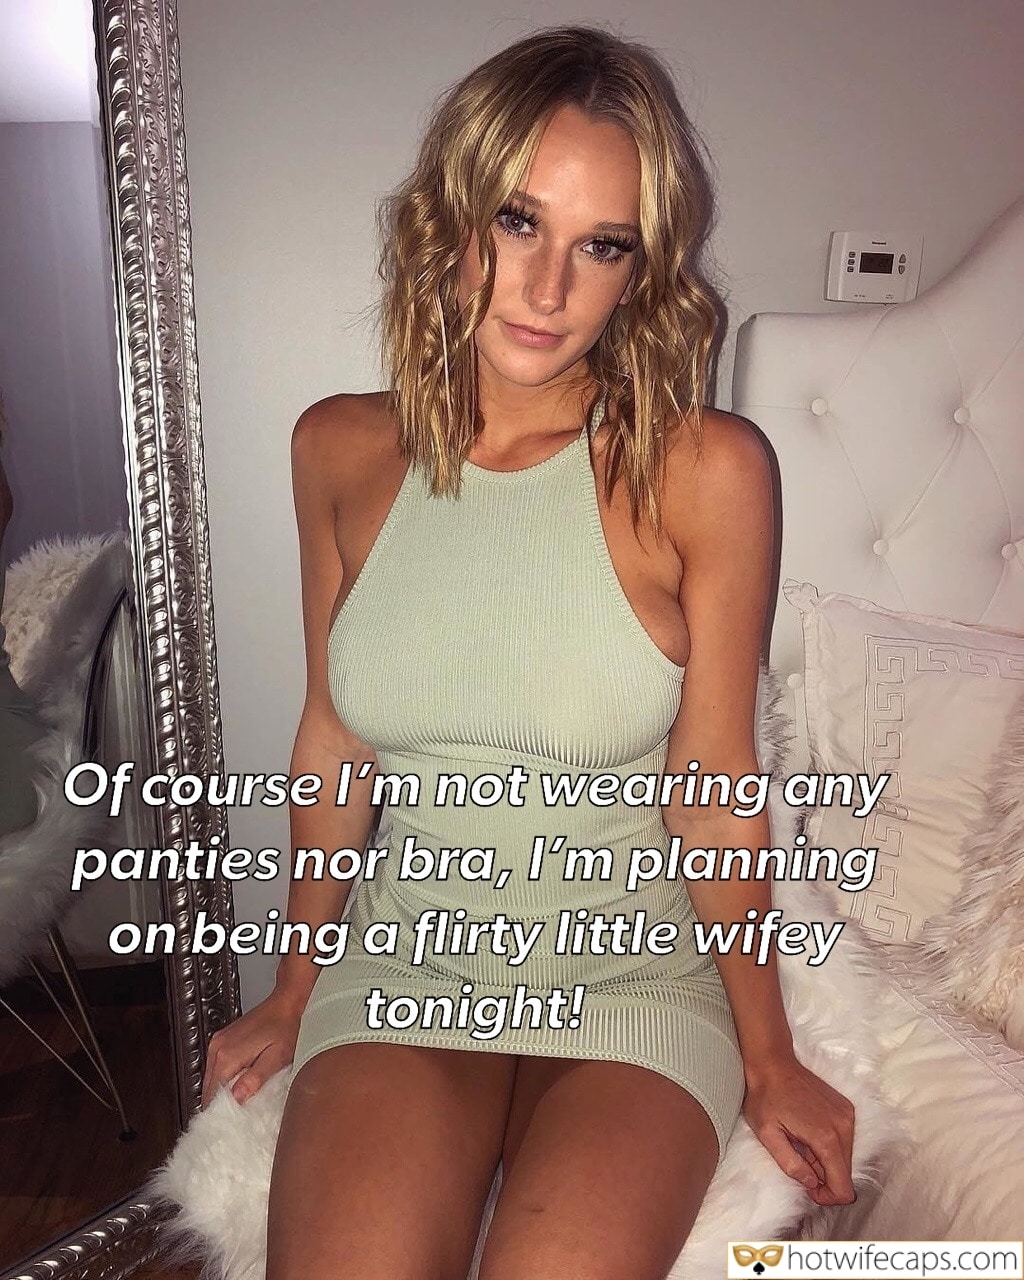 Wife Sharing Sexy Memes No Panties Cuckold Cleanup Cheating hotwife caption: Of course I’m not wearing any panties or bra, I’m planning on being a flirty little wifey tonight! Blonde Sexywife Does Not Wear Panties